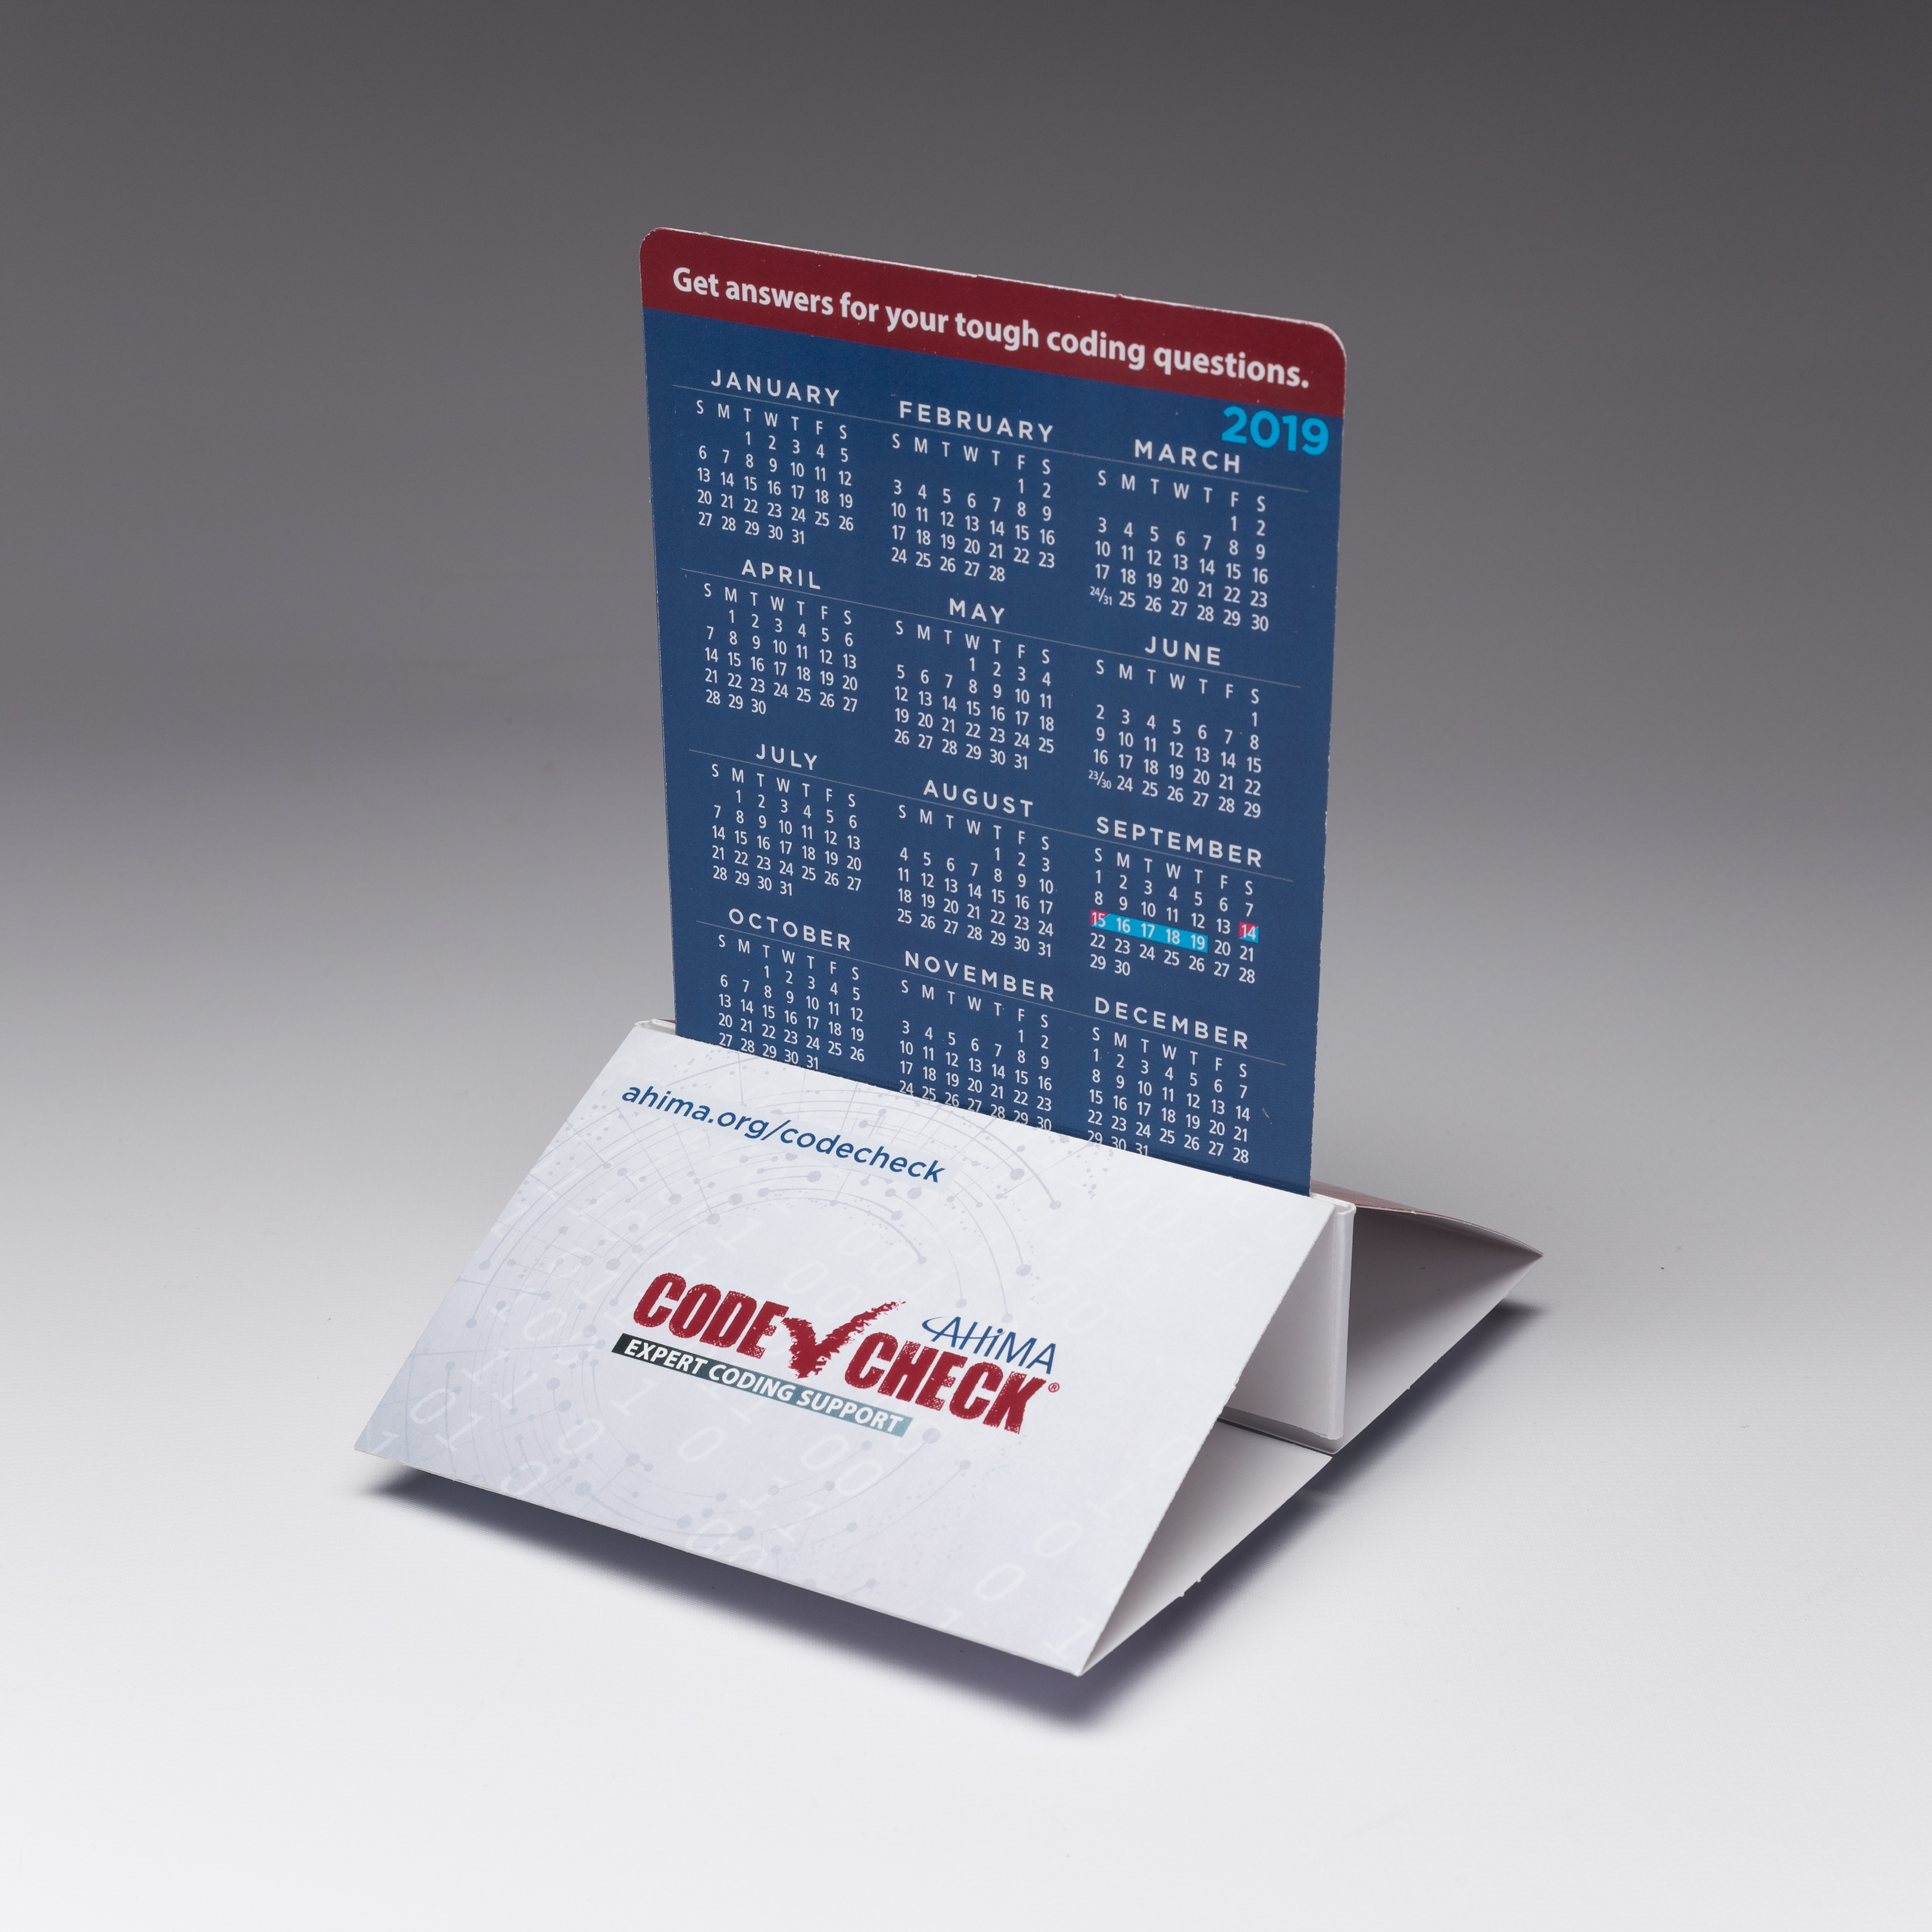 Ensure your healthcare services stay top of mind with a desktop calendar from Red Paper Plane